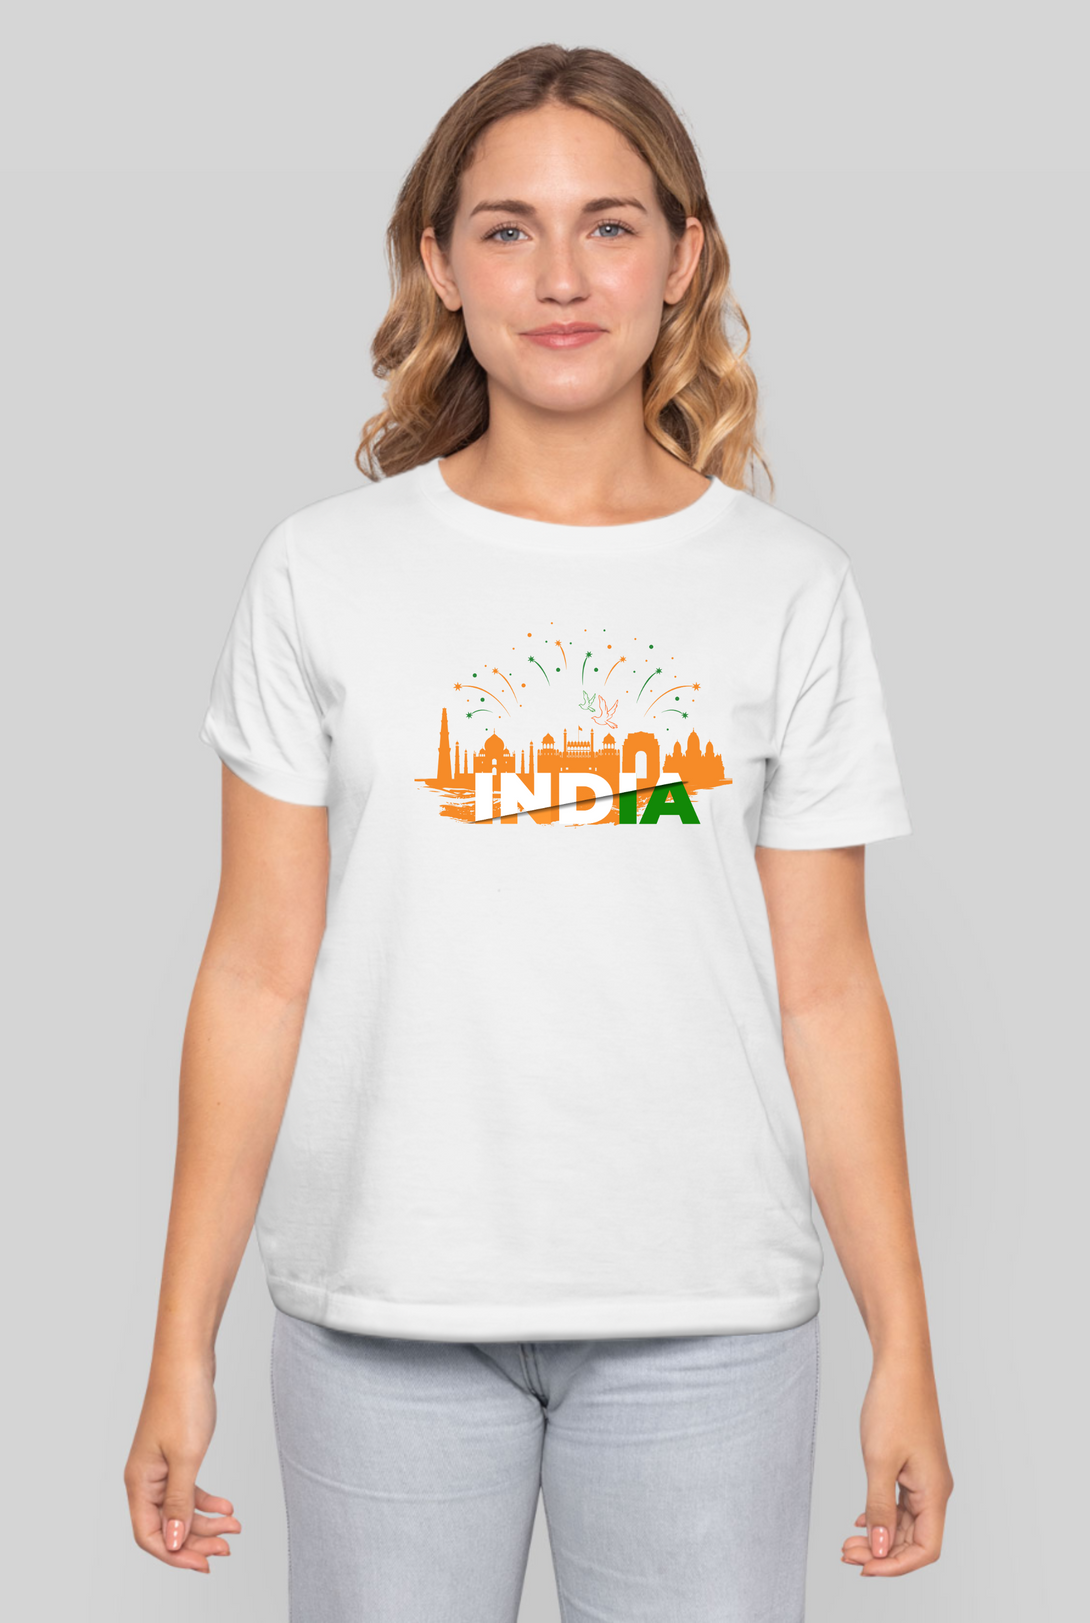 India Monument Tribute White Printed T-Shirt For Women - WowWaves - 4